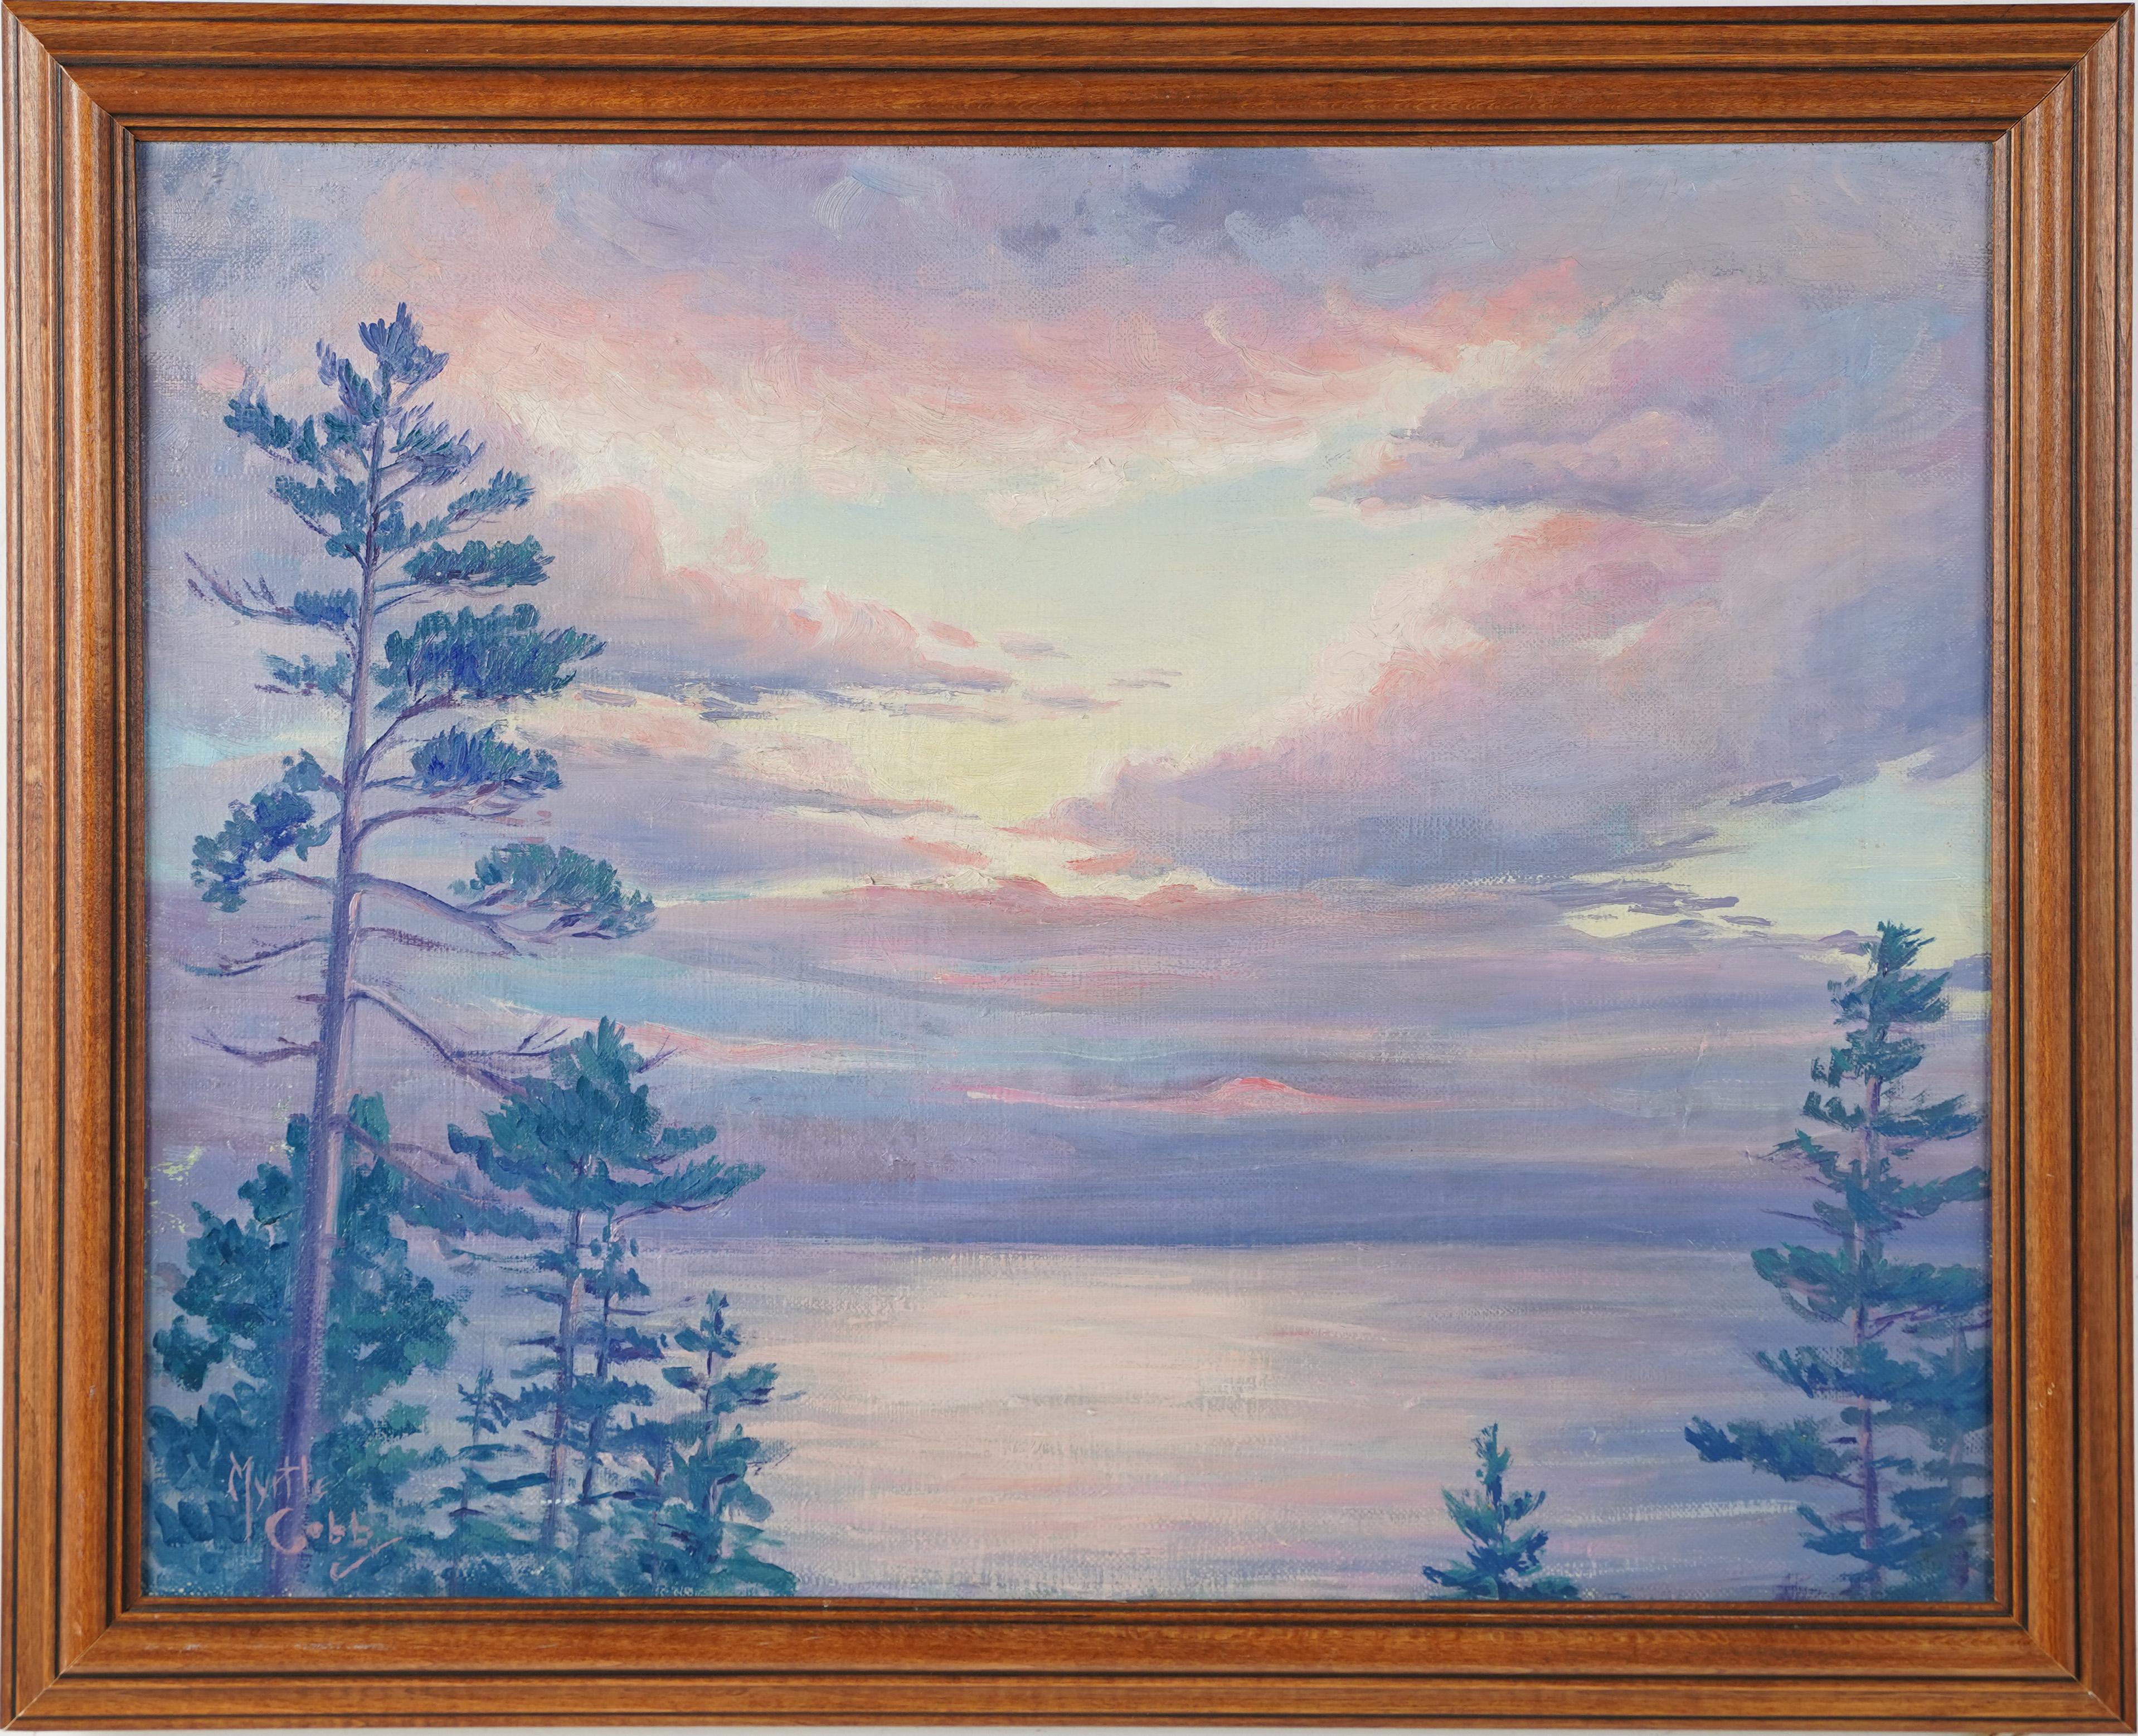  Antique American School Signed Panoramic Sunset Landscape Framed Oil Painting